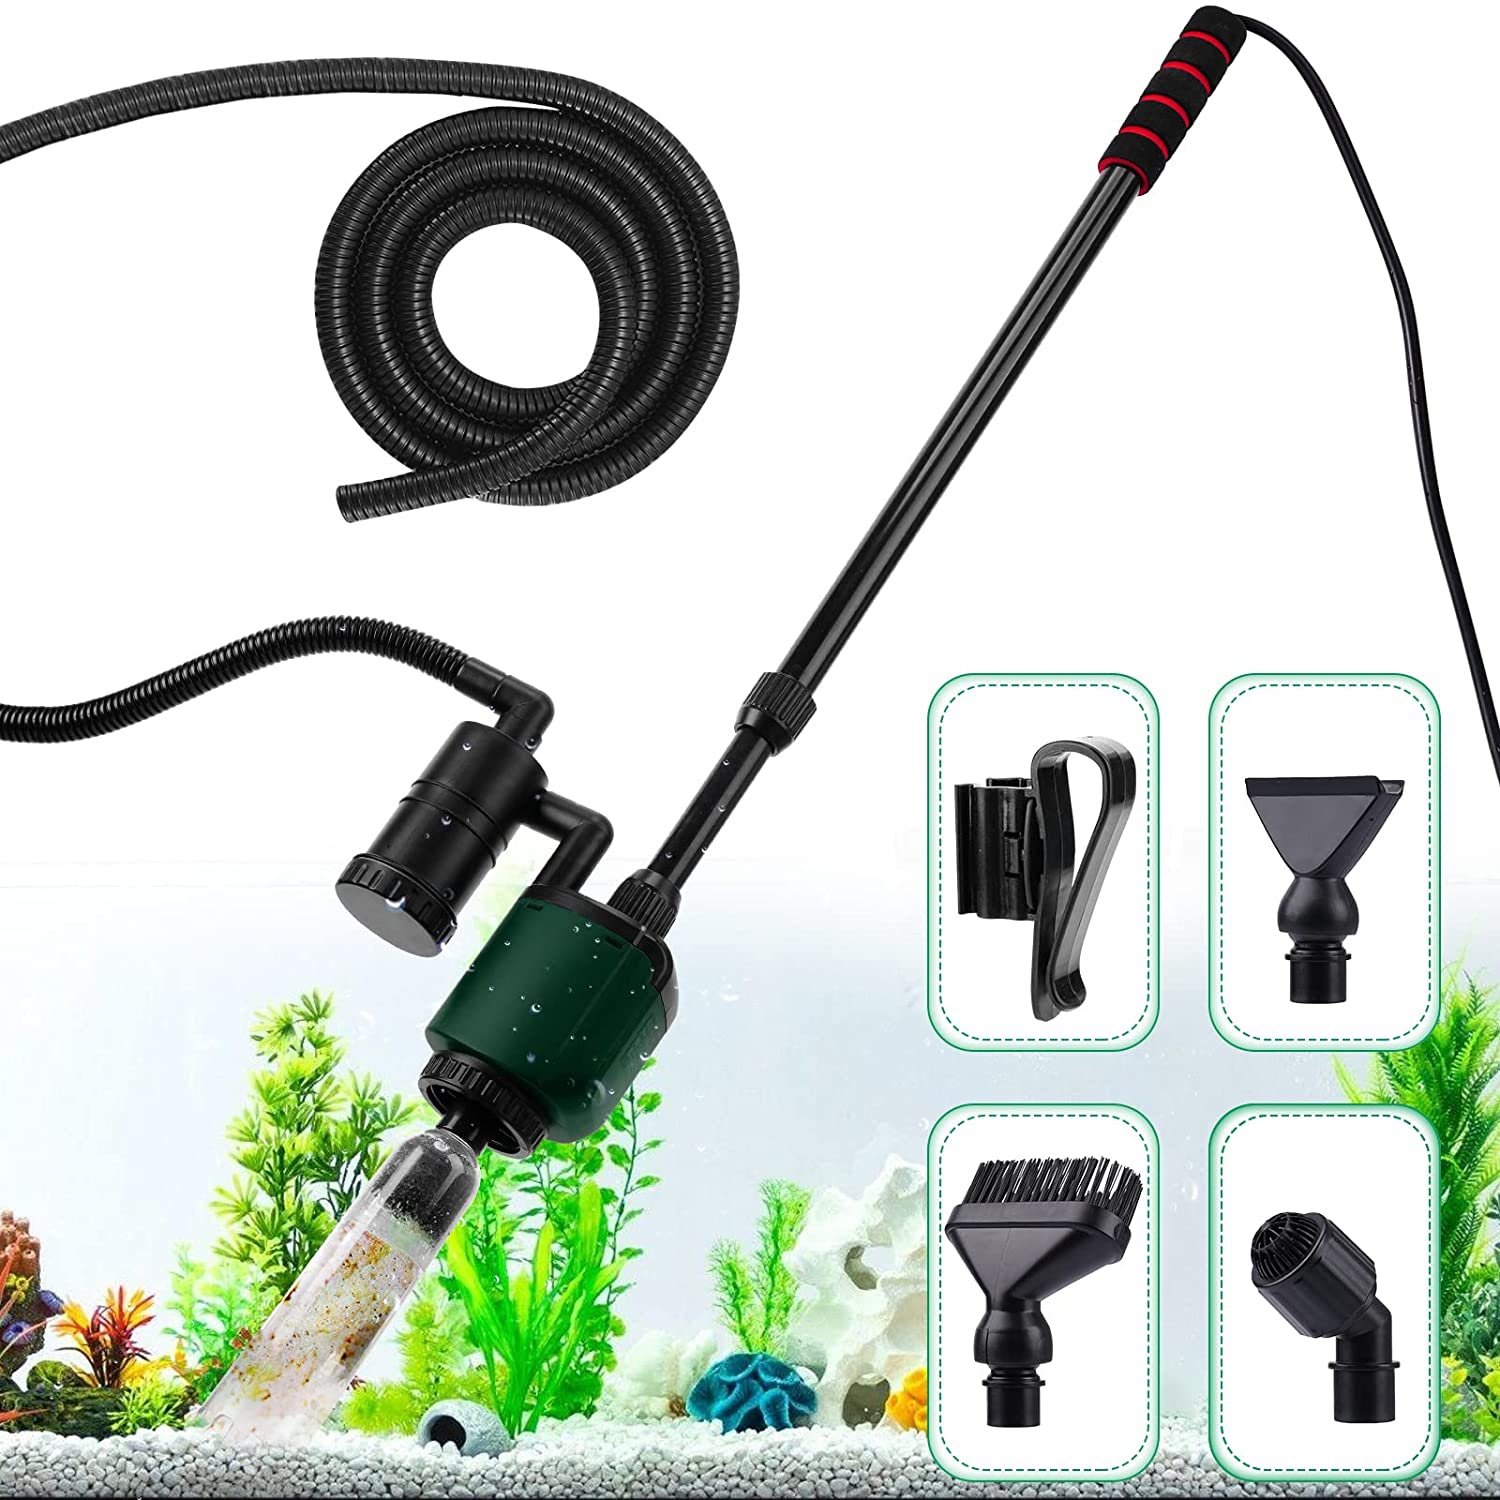 QODISA Aquarium Gravel Cleaner, New Upgrade Quick Vacuum Water Changer with Electric Automatic Removable Fish Tank Cleaning Tools Sand Cleaner Accessories Siphon Universal Pump Aquarium Water Changing